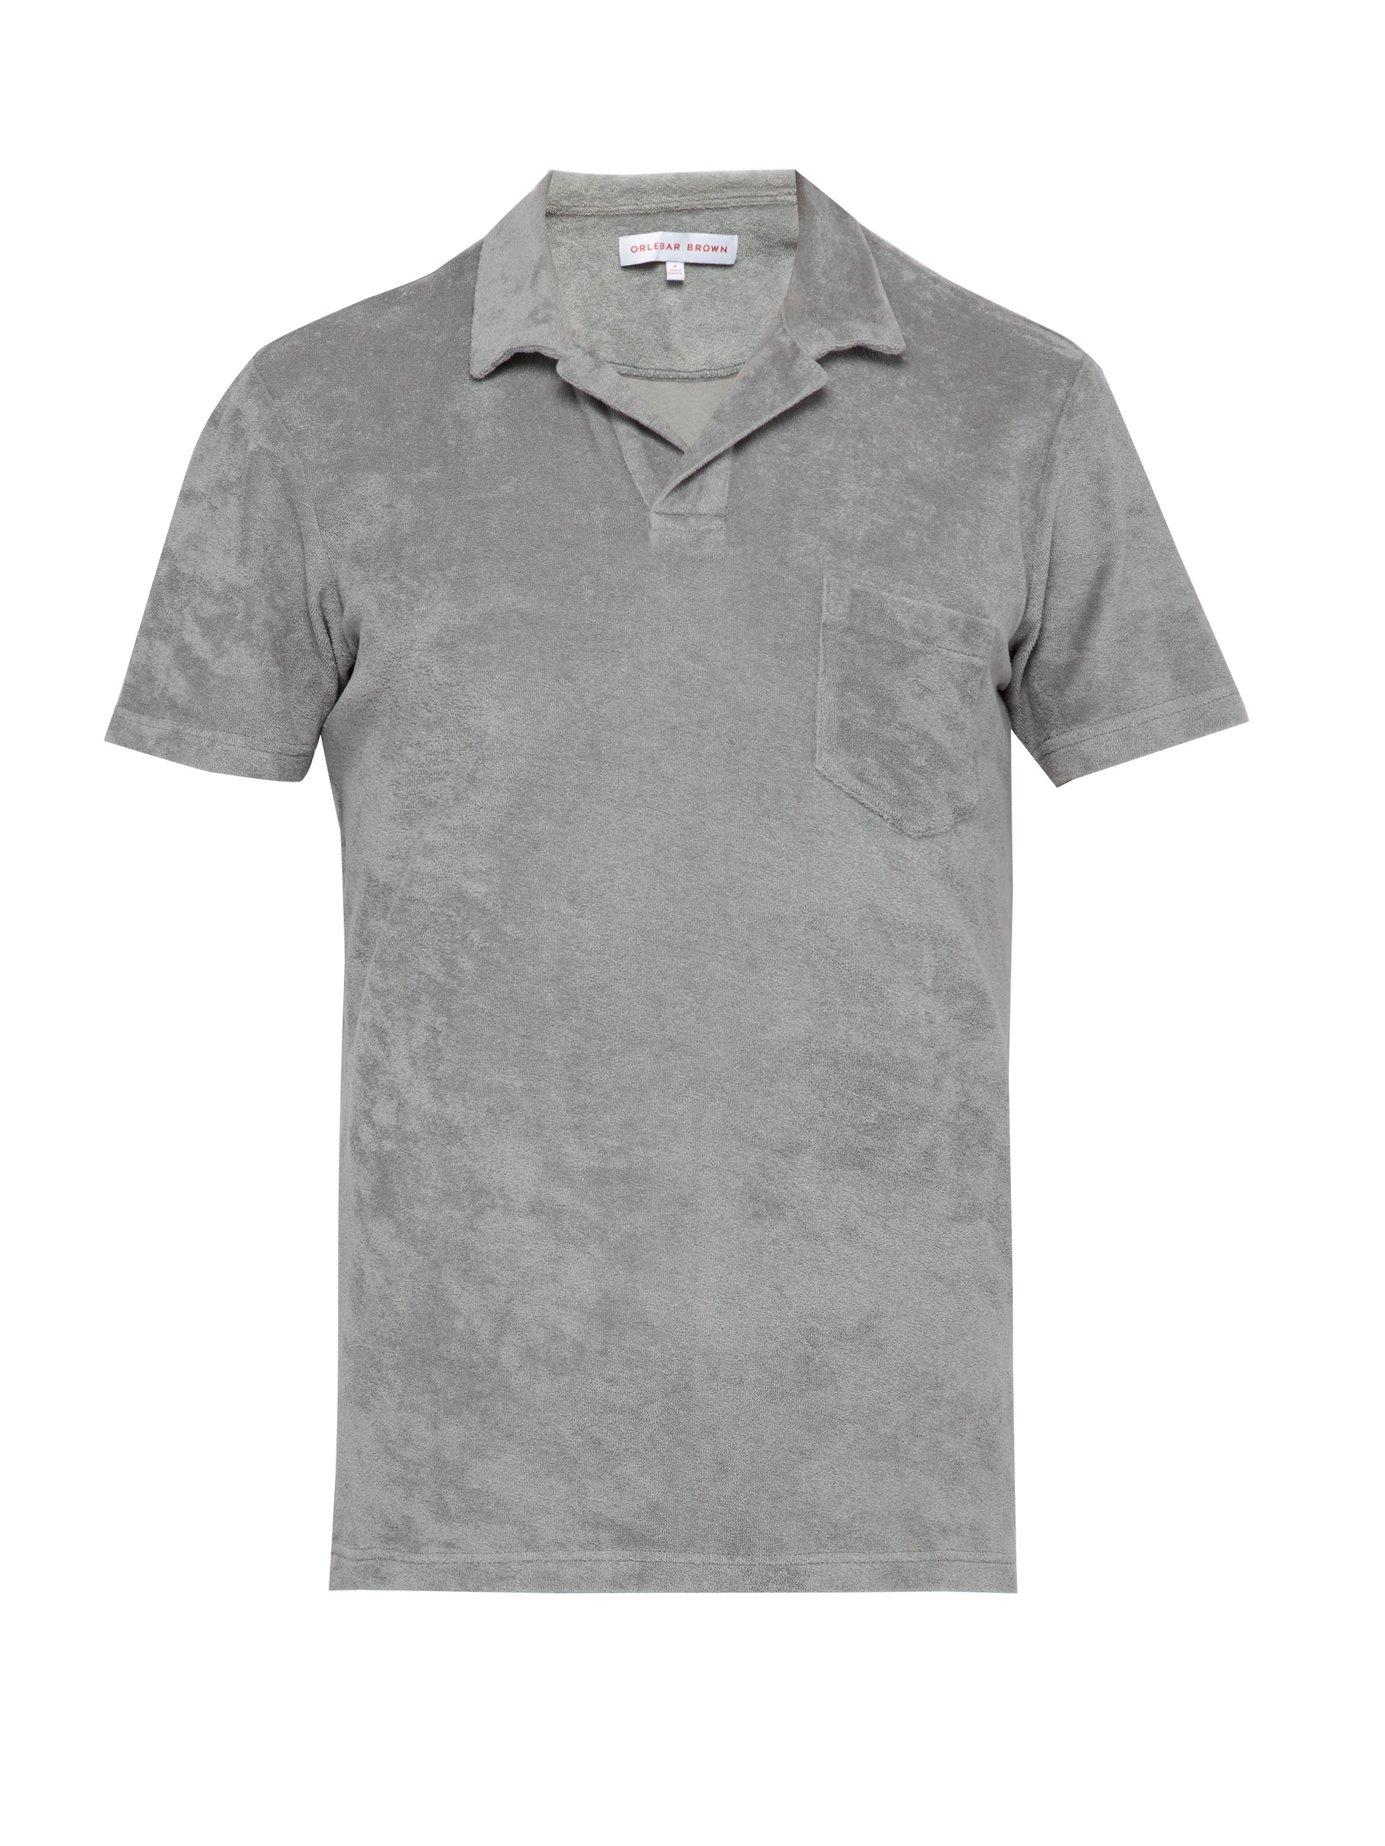 Lyst - Orlebar Brown Terry Towelling Cotton Polo Shirt in Gray for Men